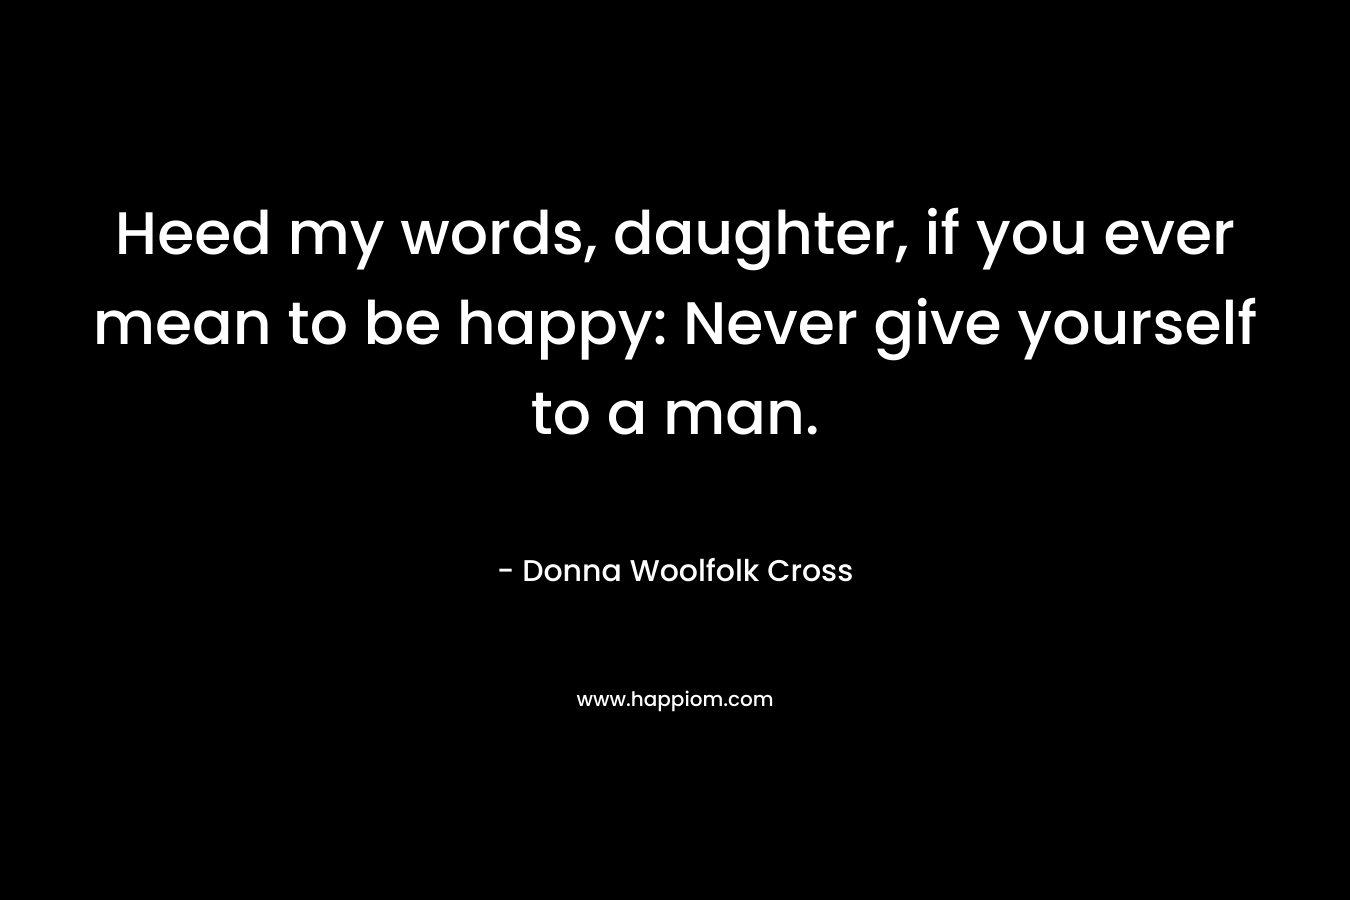 Heed my words, daughter, if you ever mean to be happy: Never give yourself to a man. – Donna Woolfolk Cross